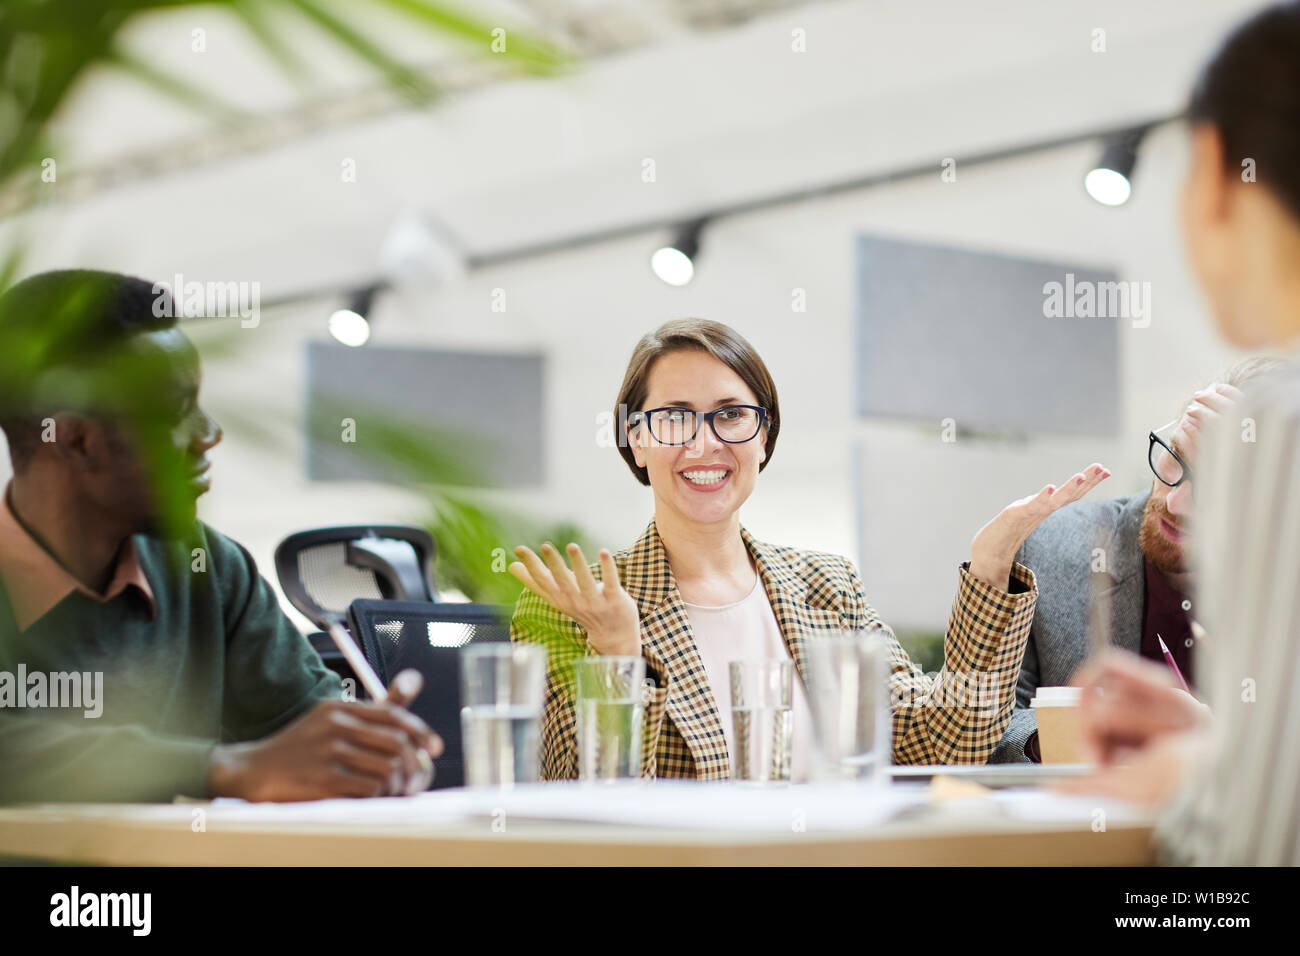 Portrait of cheerful businesswoman wearing glasses gesturing actively during meeting in office, copy space Stock Photo